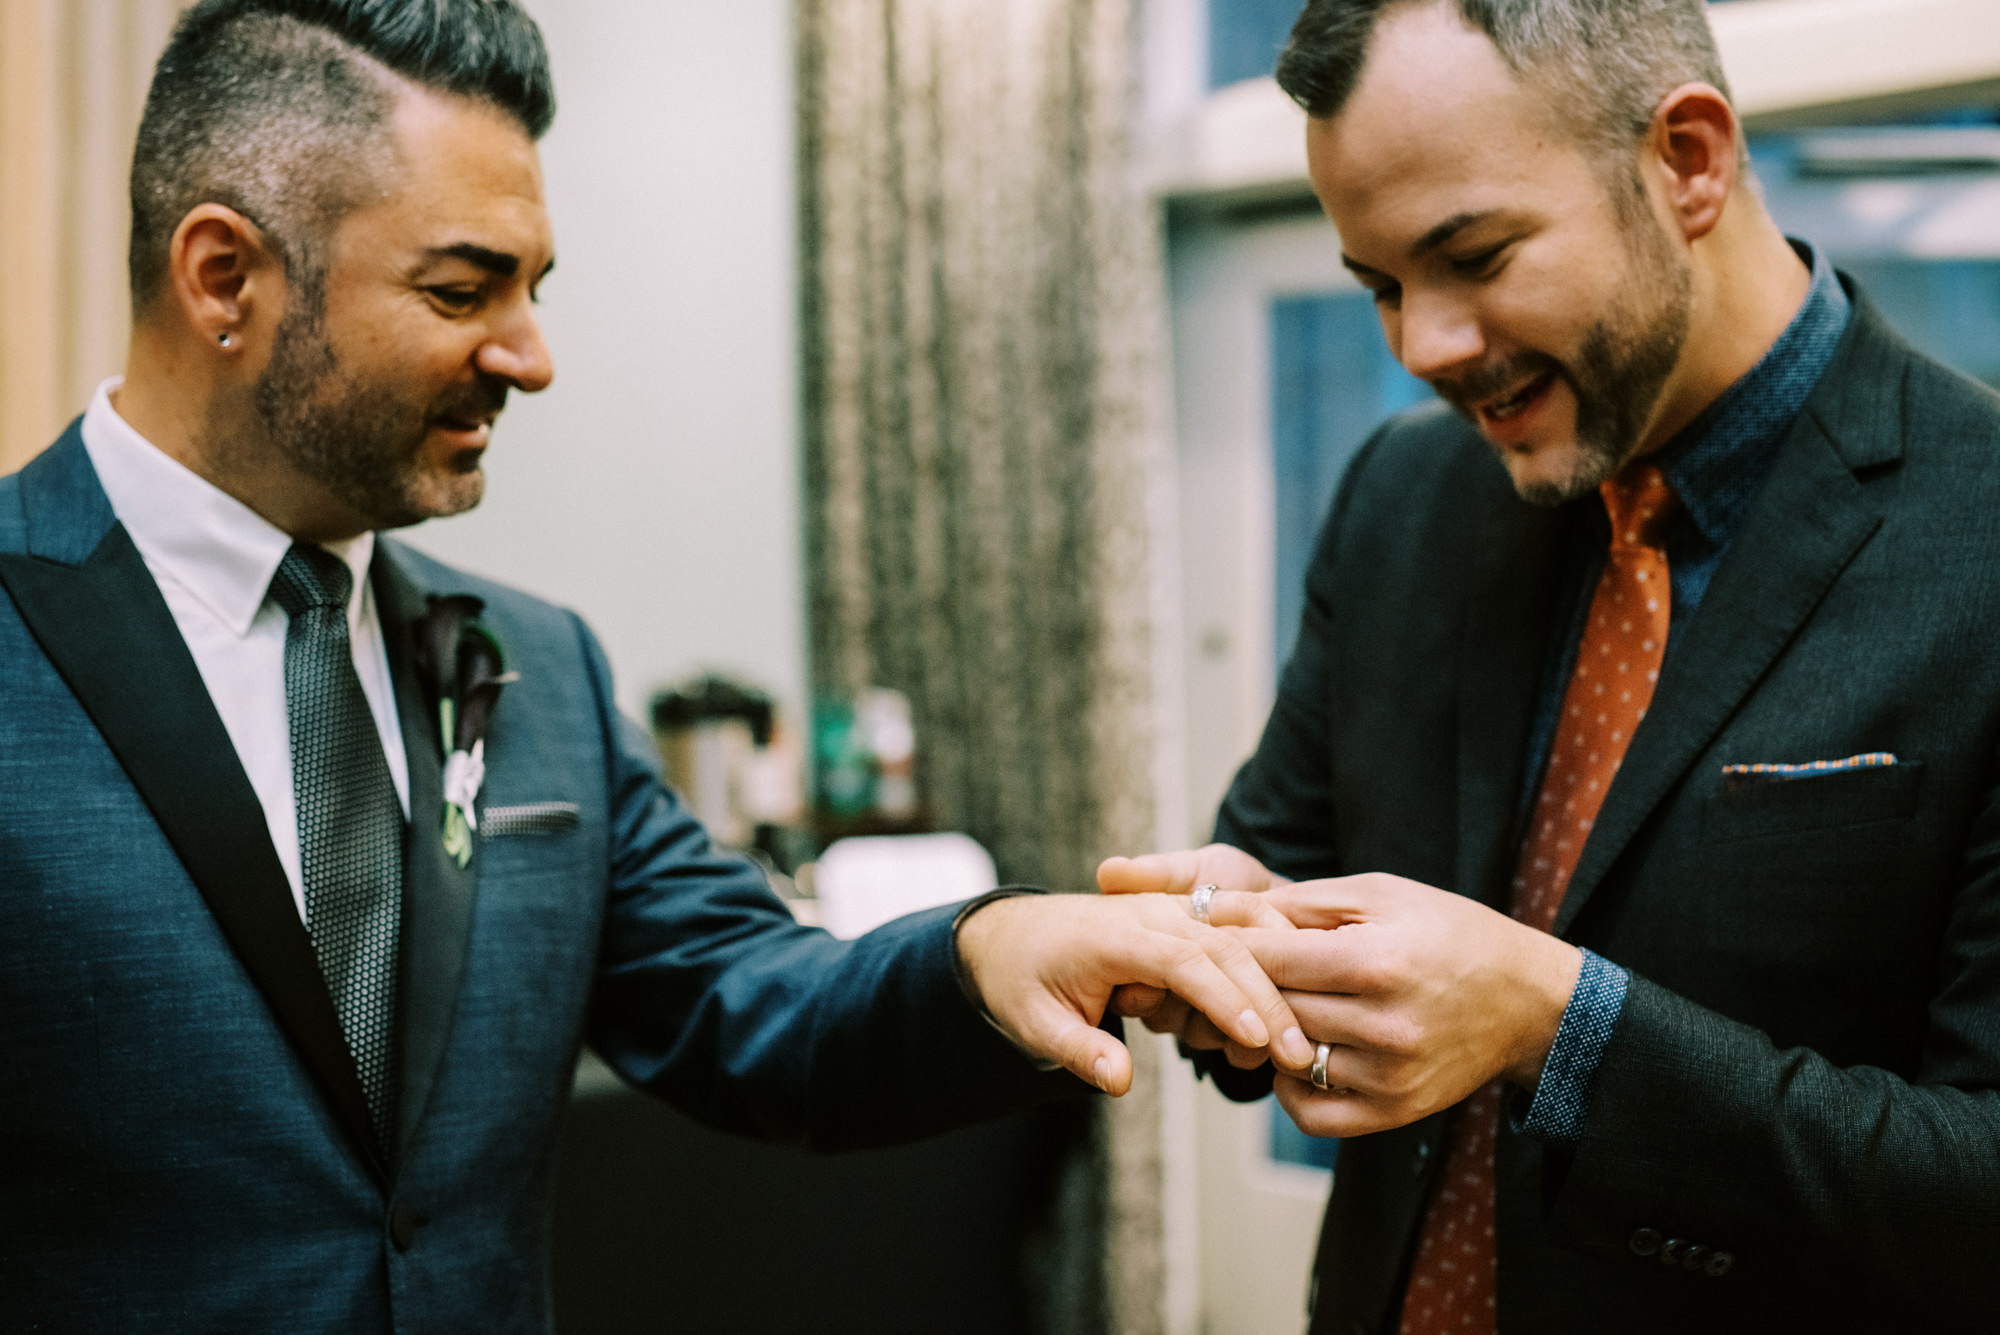 Alexis Hotel wedding: Michael and Justin post wedding ceremony moments